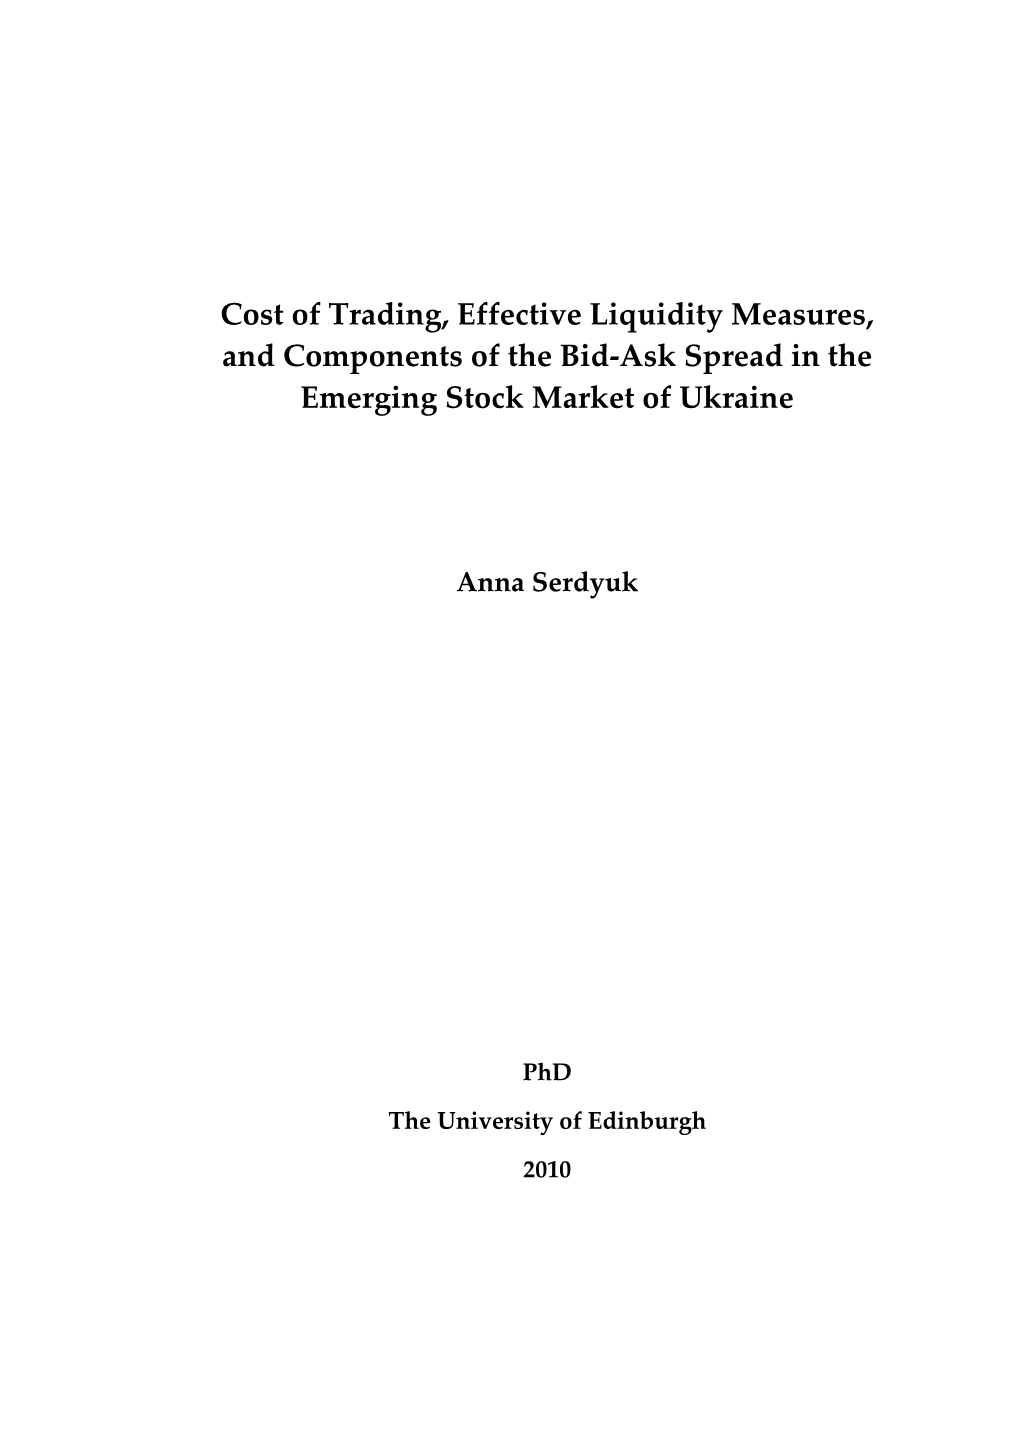 Cost of Trading, Effective Liquidity Measures, and Components of the Bid-Ask Spread in the Emerging Stock Market of Ukraine